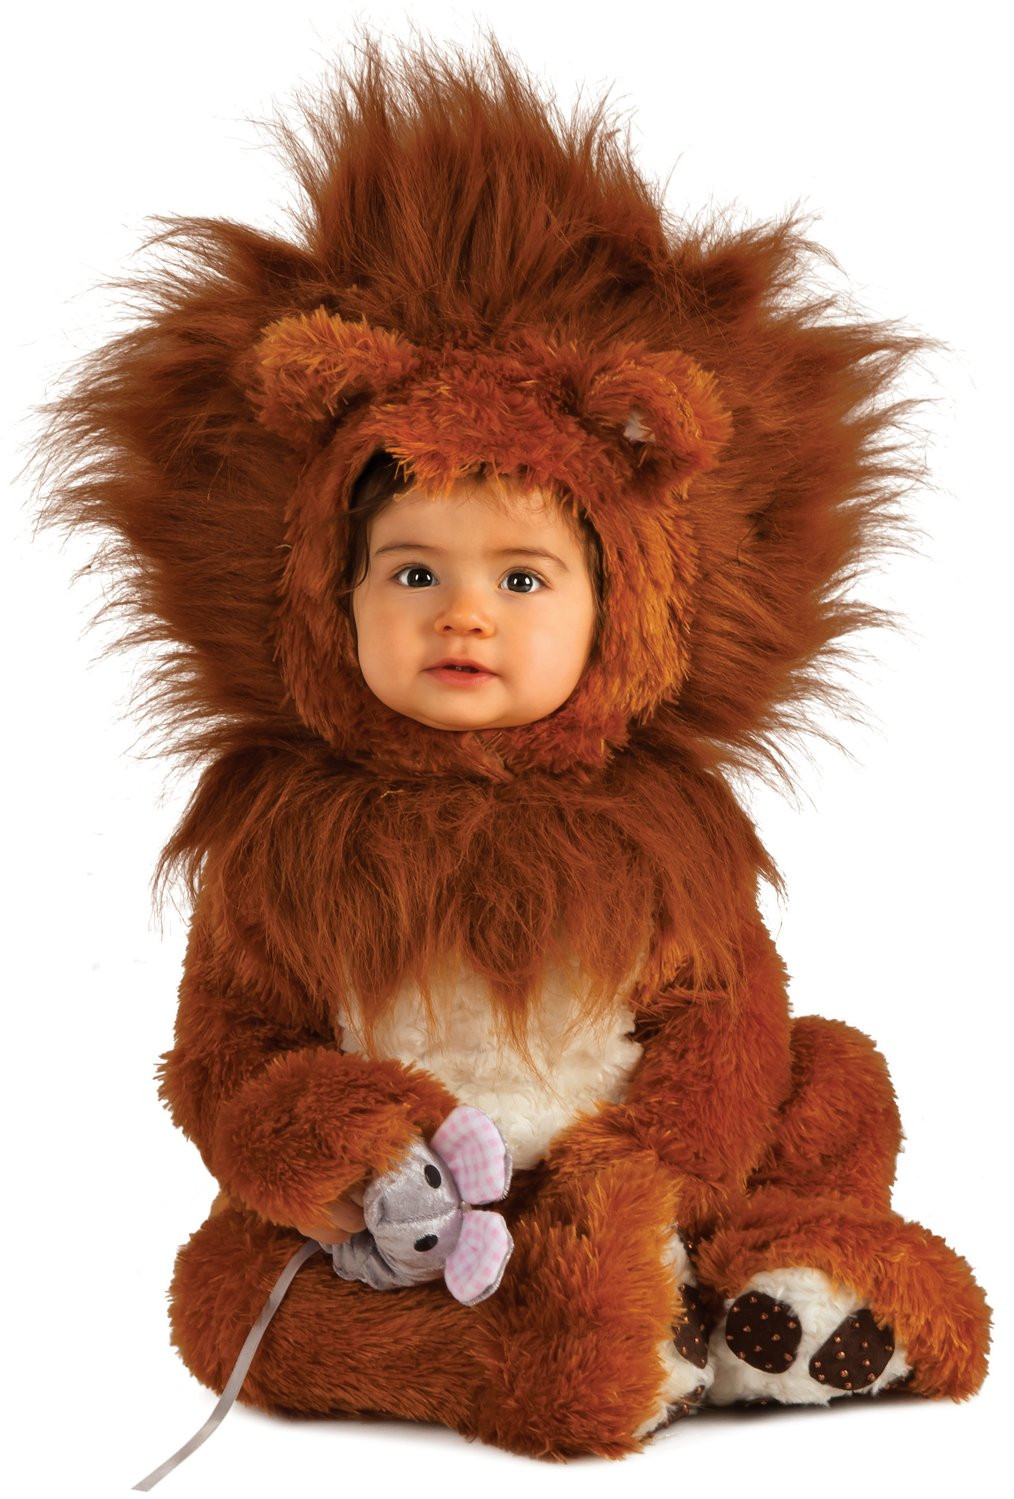 DIY Lion Costume For Toddler
 Ferocious Lion Cub Baby Costume Mr Costumes